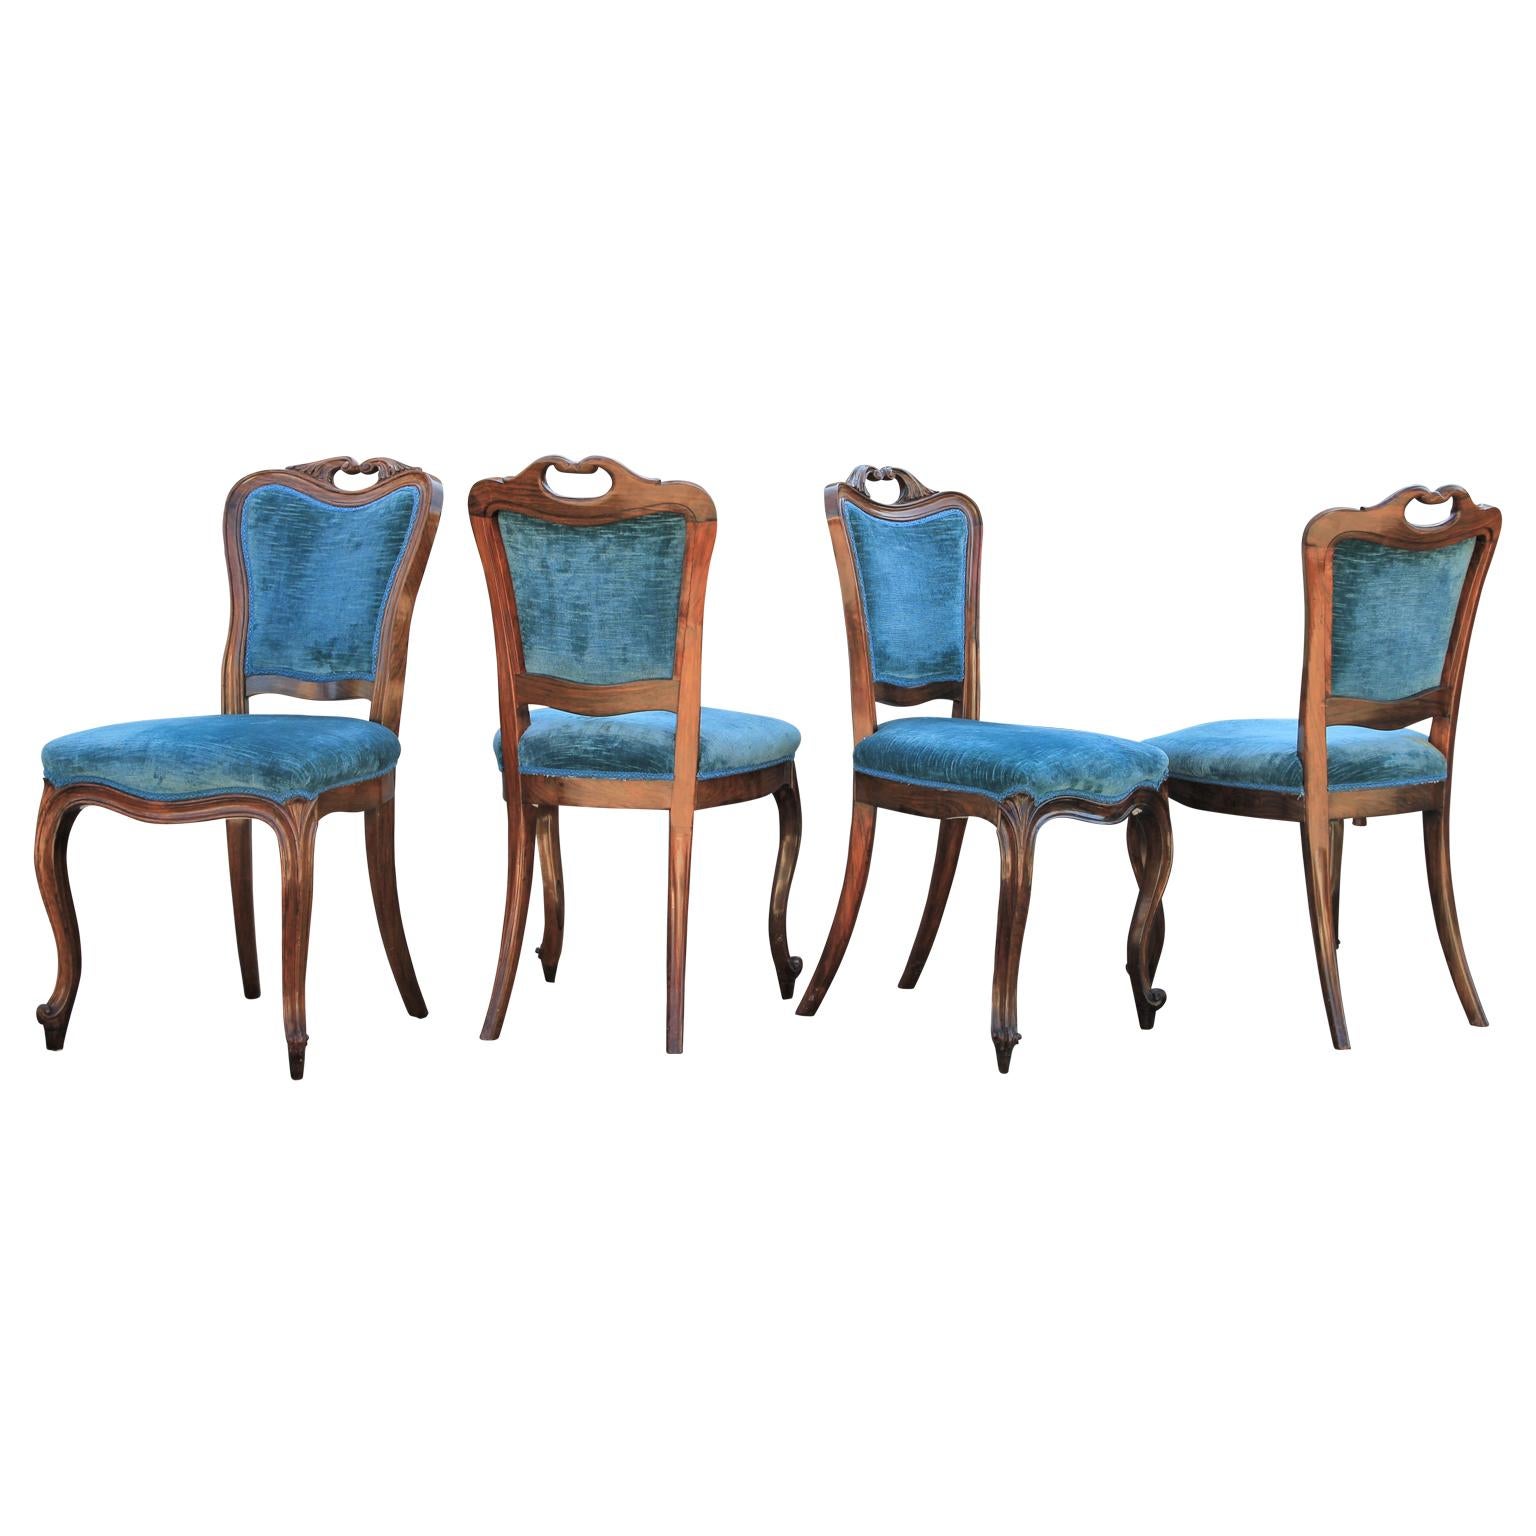 Wonderful set of four Italian Brazilian rosewood neoclassical style Italian dining chairs.
COM available.